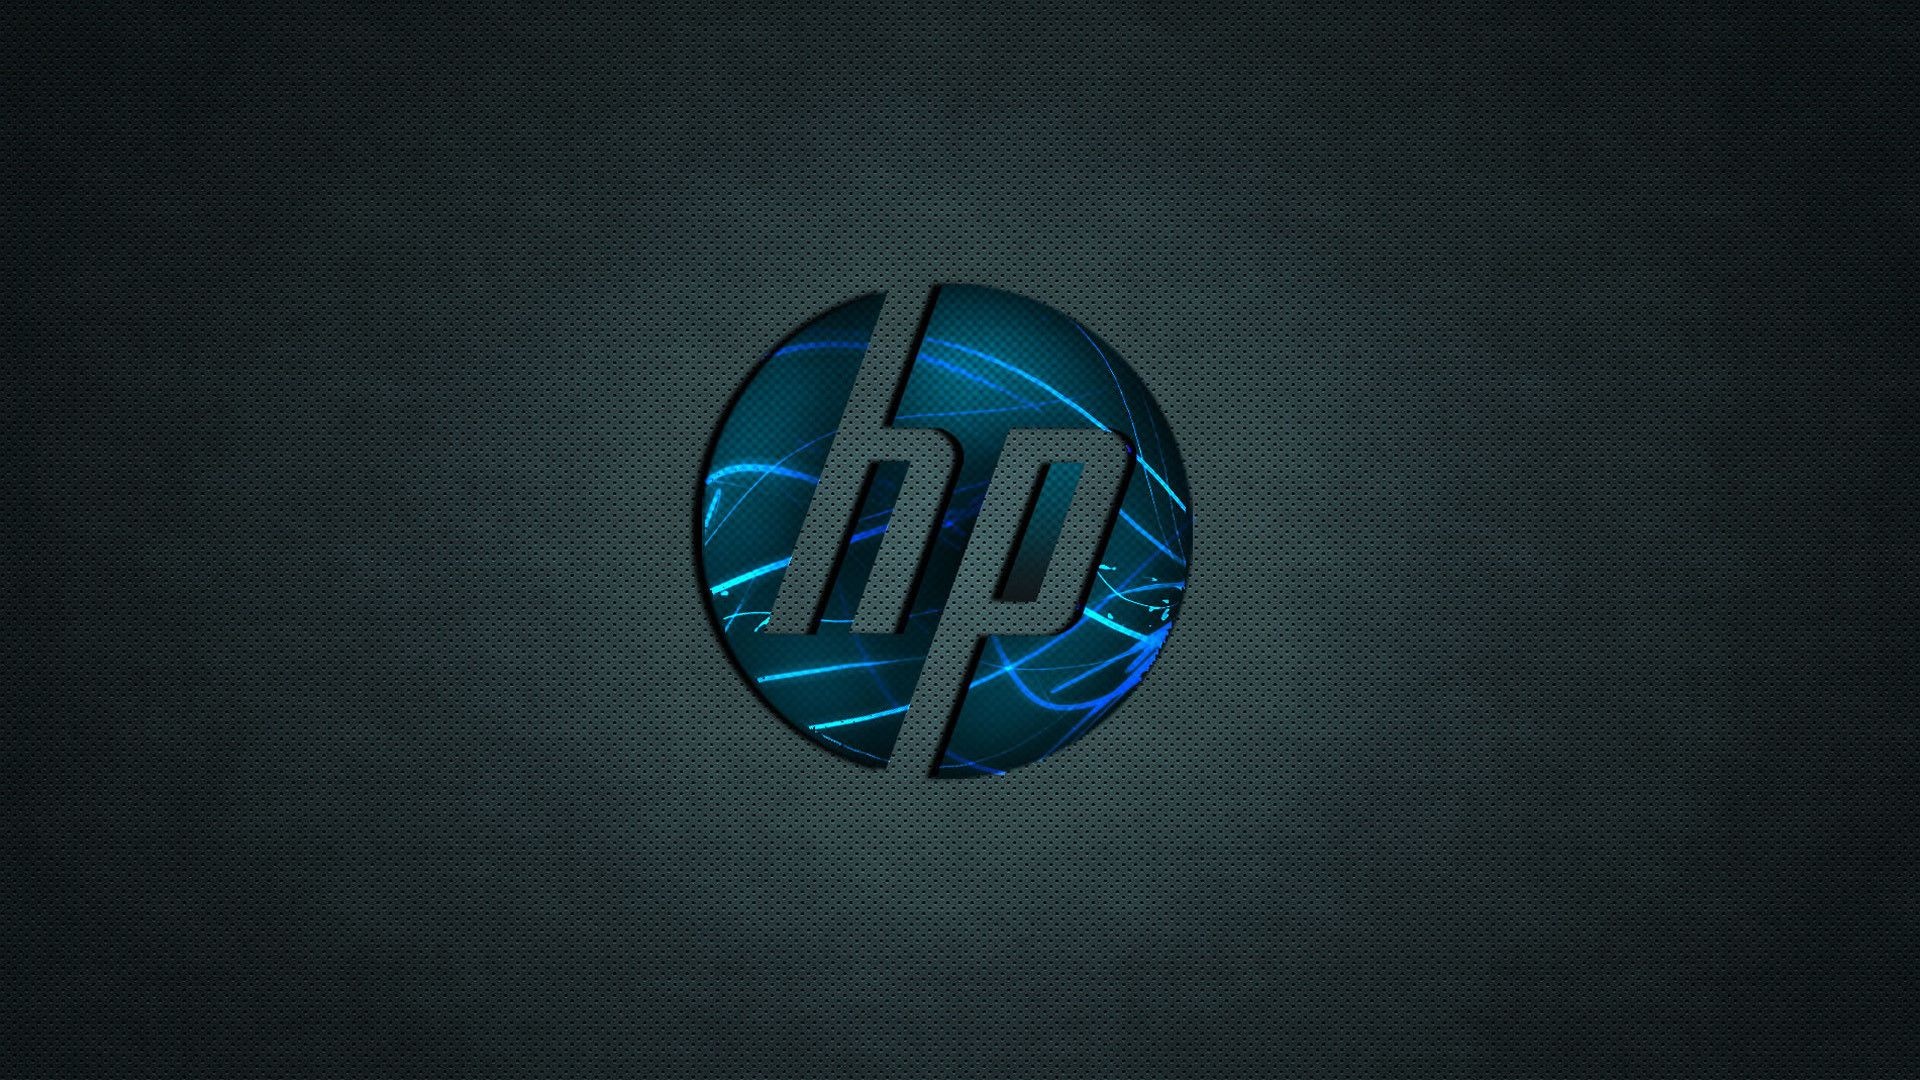 HP, Colorful wallpapers, Variety of options, 1920x1080 Full HD Desktop